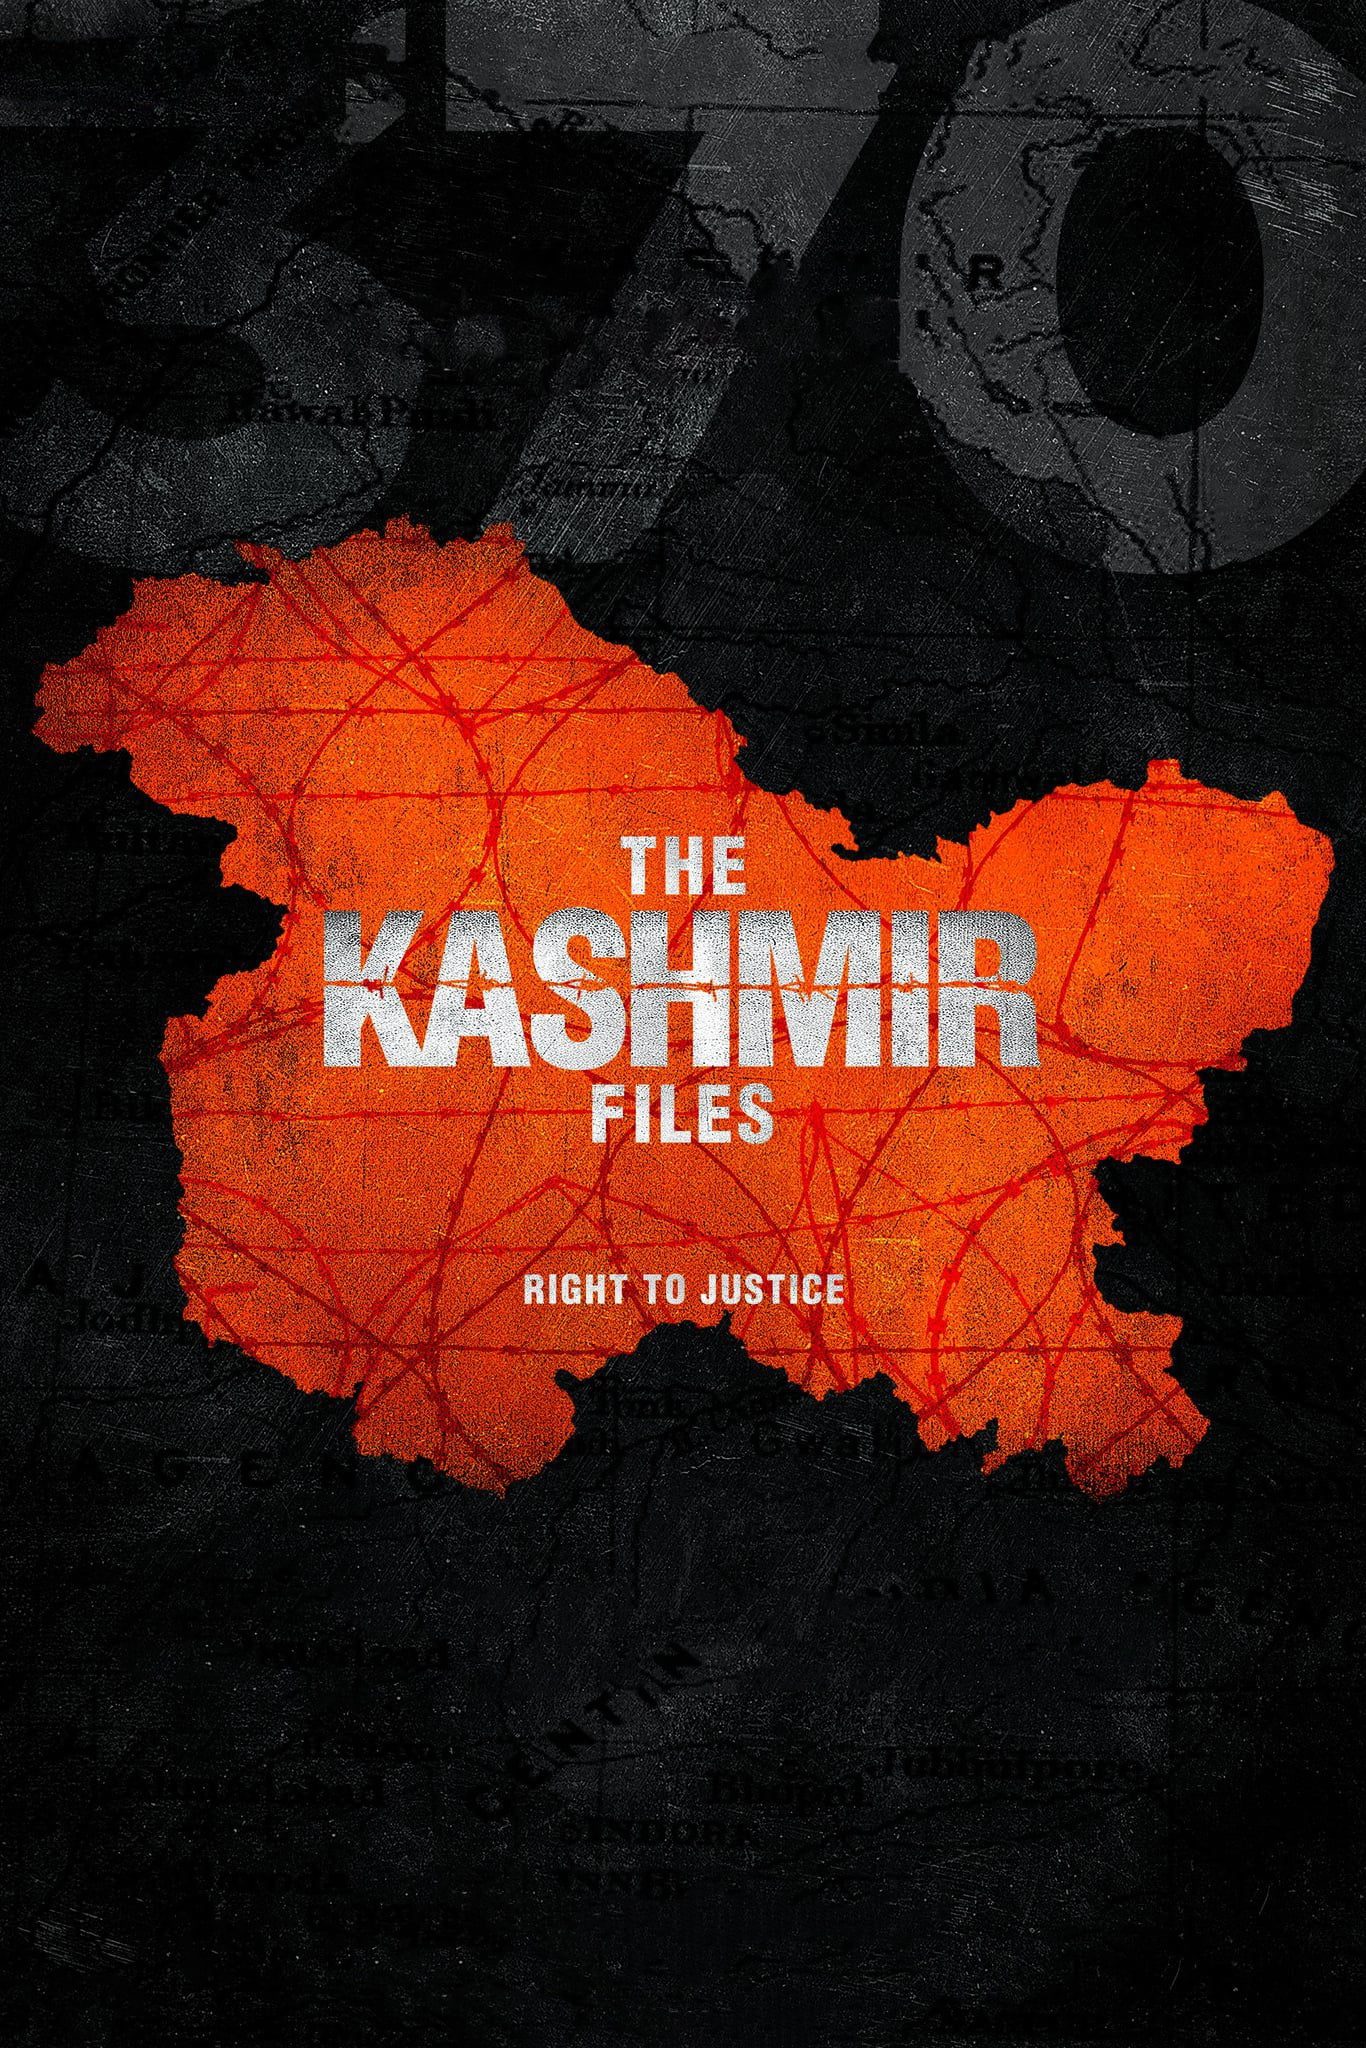 Poster for the movie "The Kashmir Files"